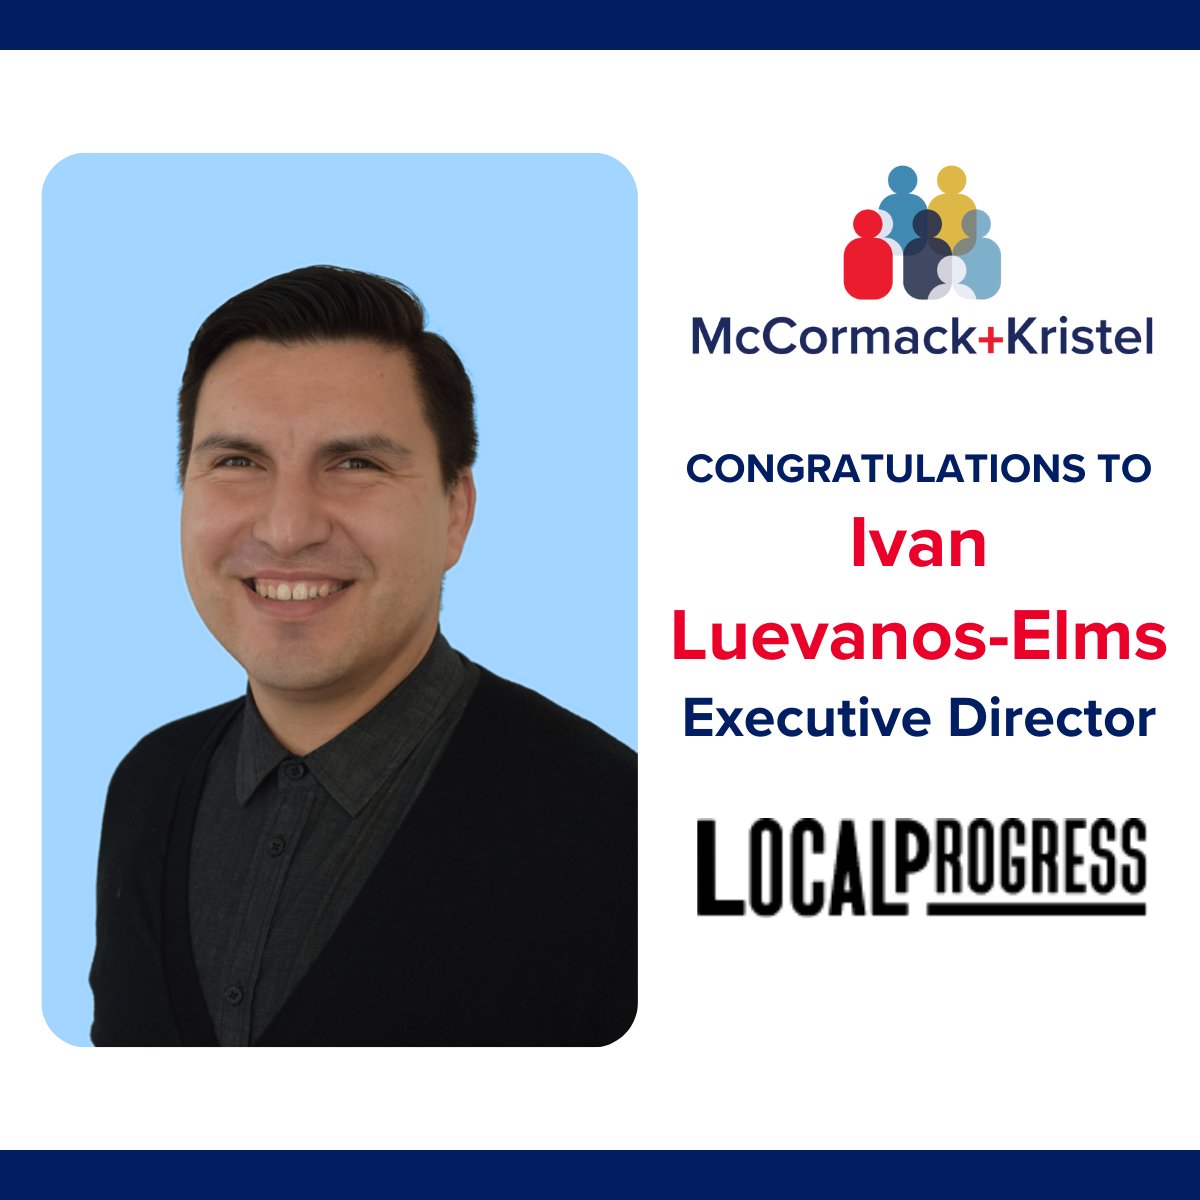 Join us in congratulating Ivan Luevanos-Elms on his new role as the Executive Director of Local Progress!

Congratulations, Ivan!

#localprogress
#executiverecruiting #nonprofitrecruiting #mccormackkristel #nonprofitjobs #executiveleadership #nonprofitleadership